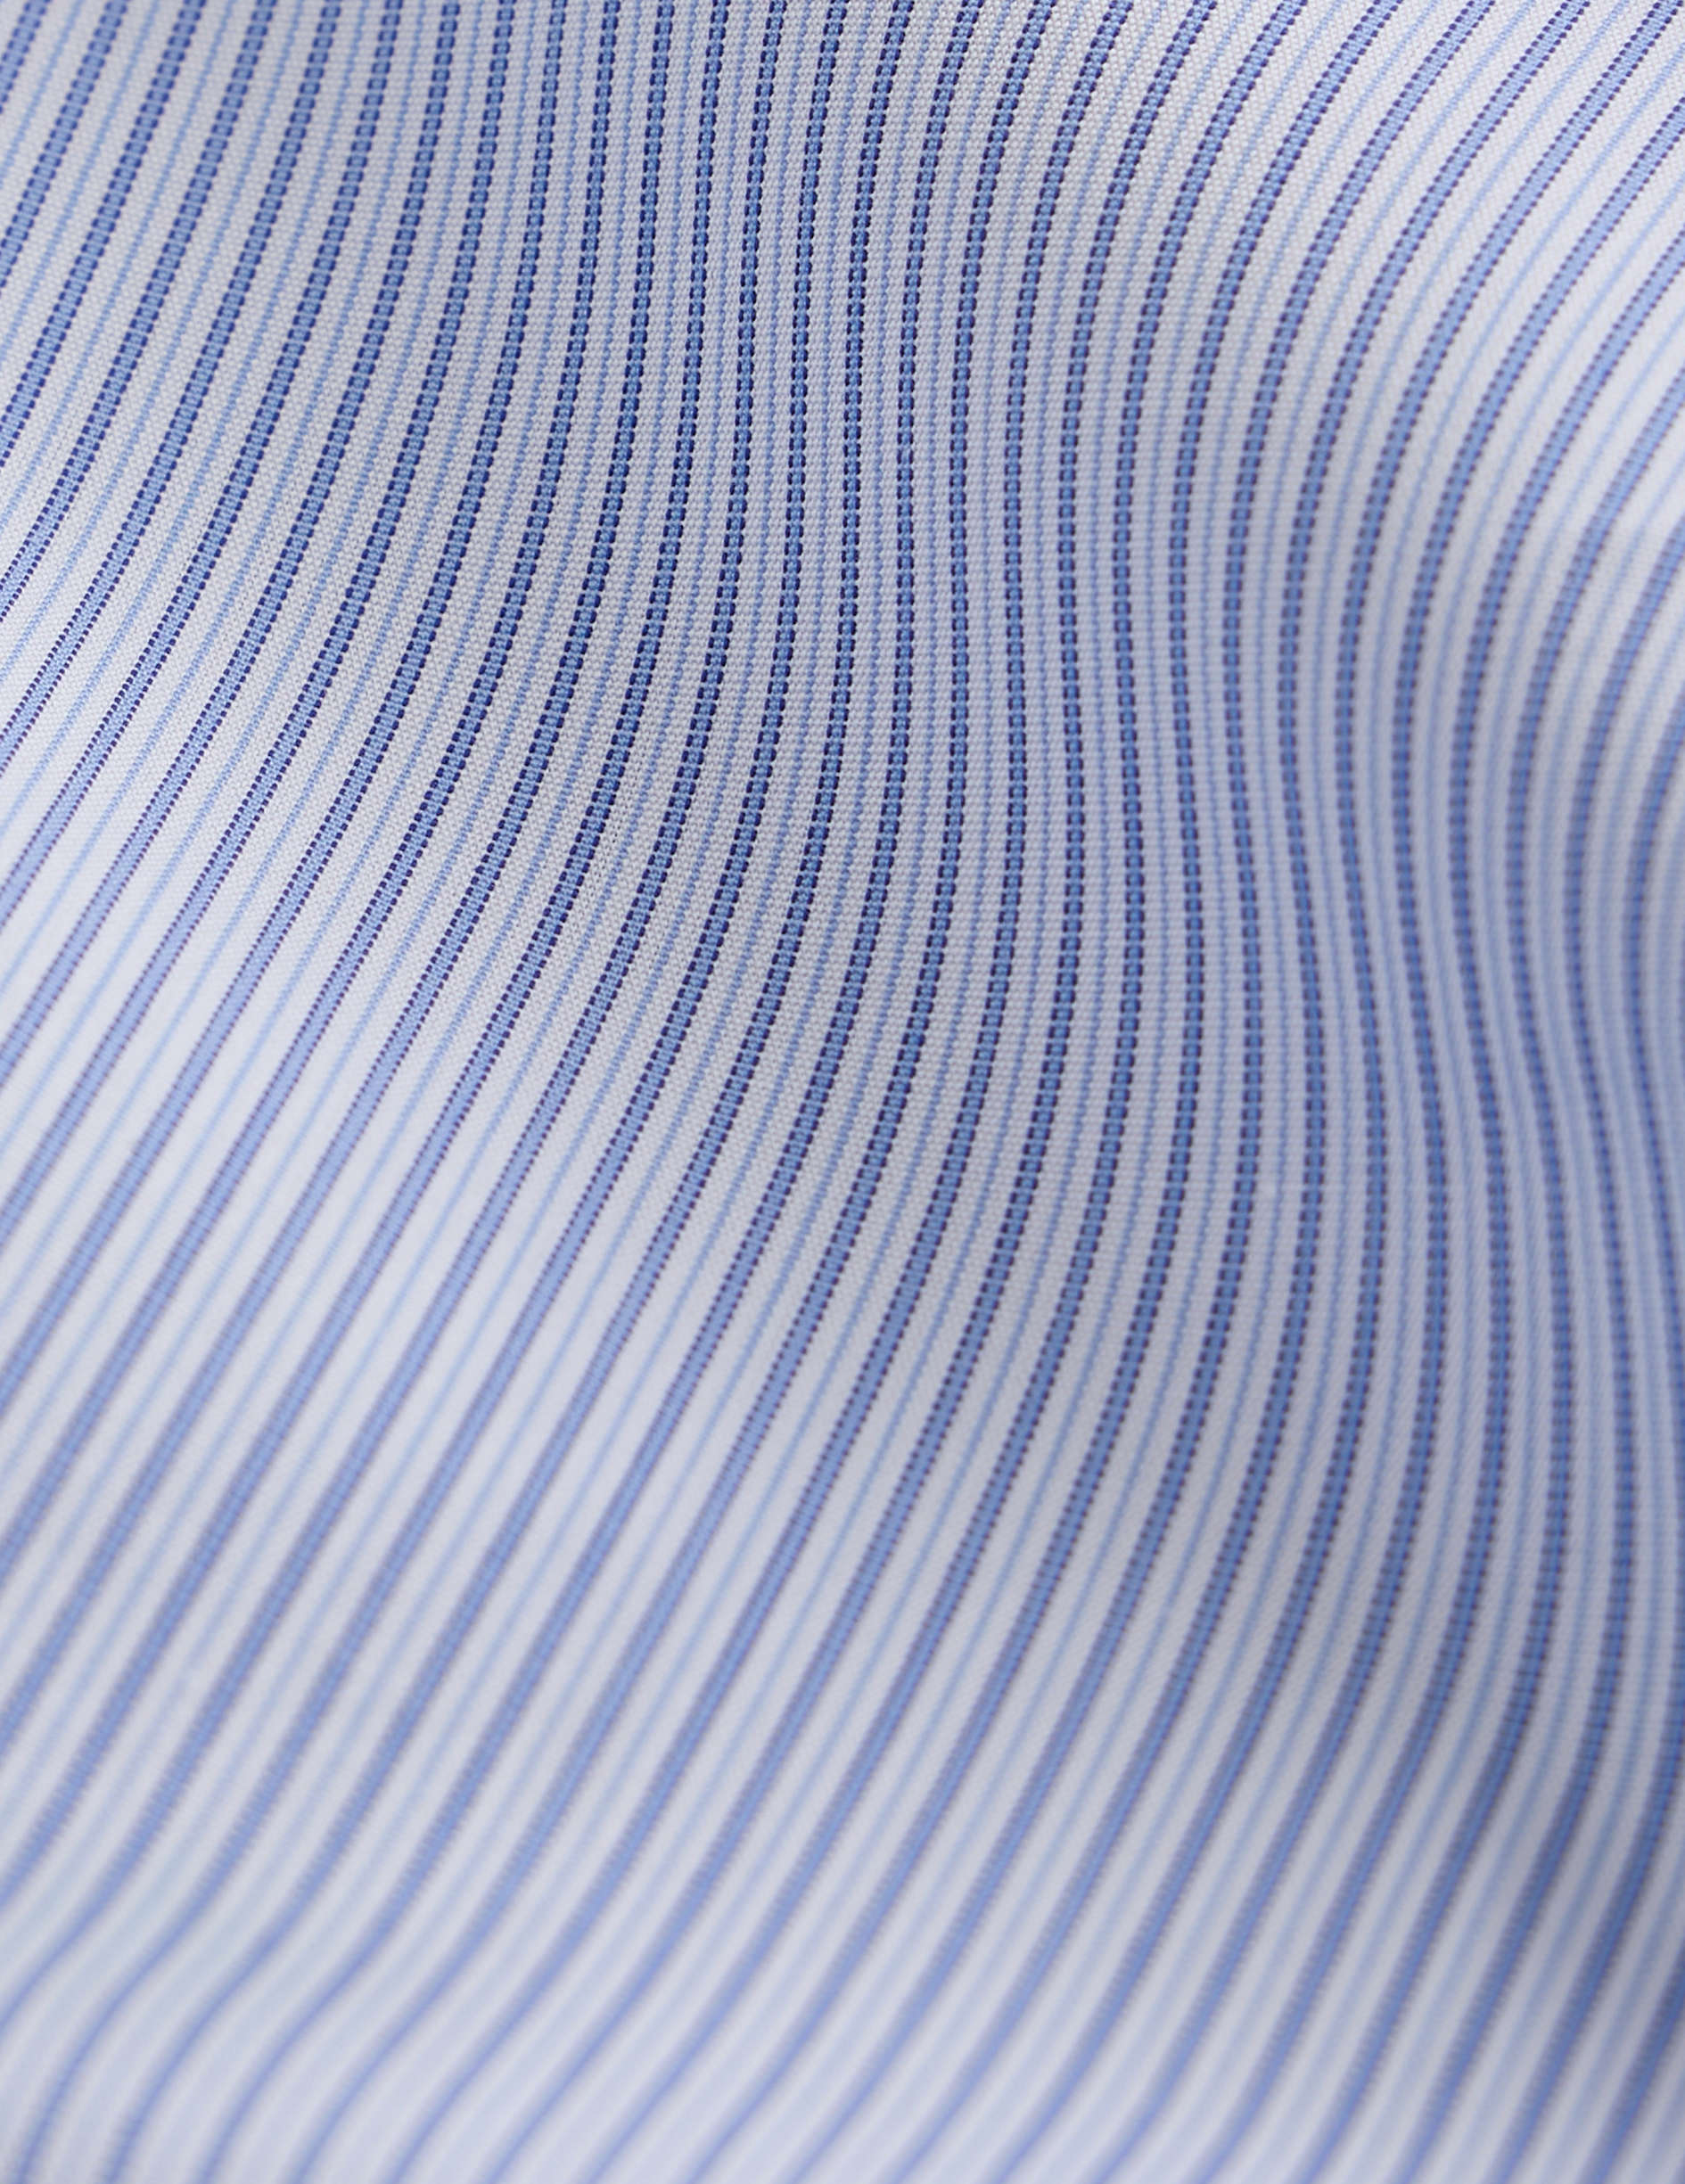 Fitted blue striped shirt - Poplin - Figaret Collar